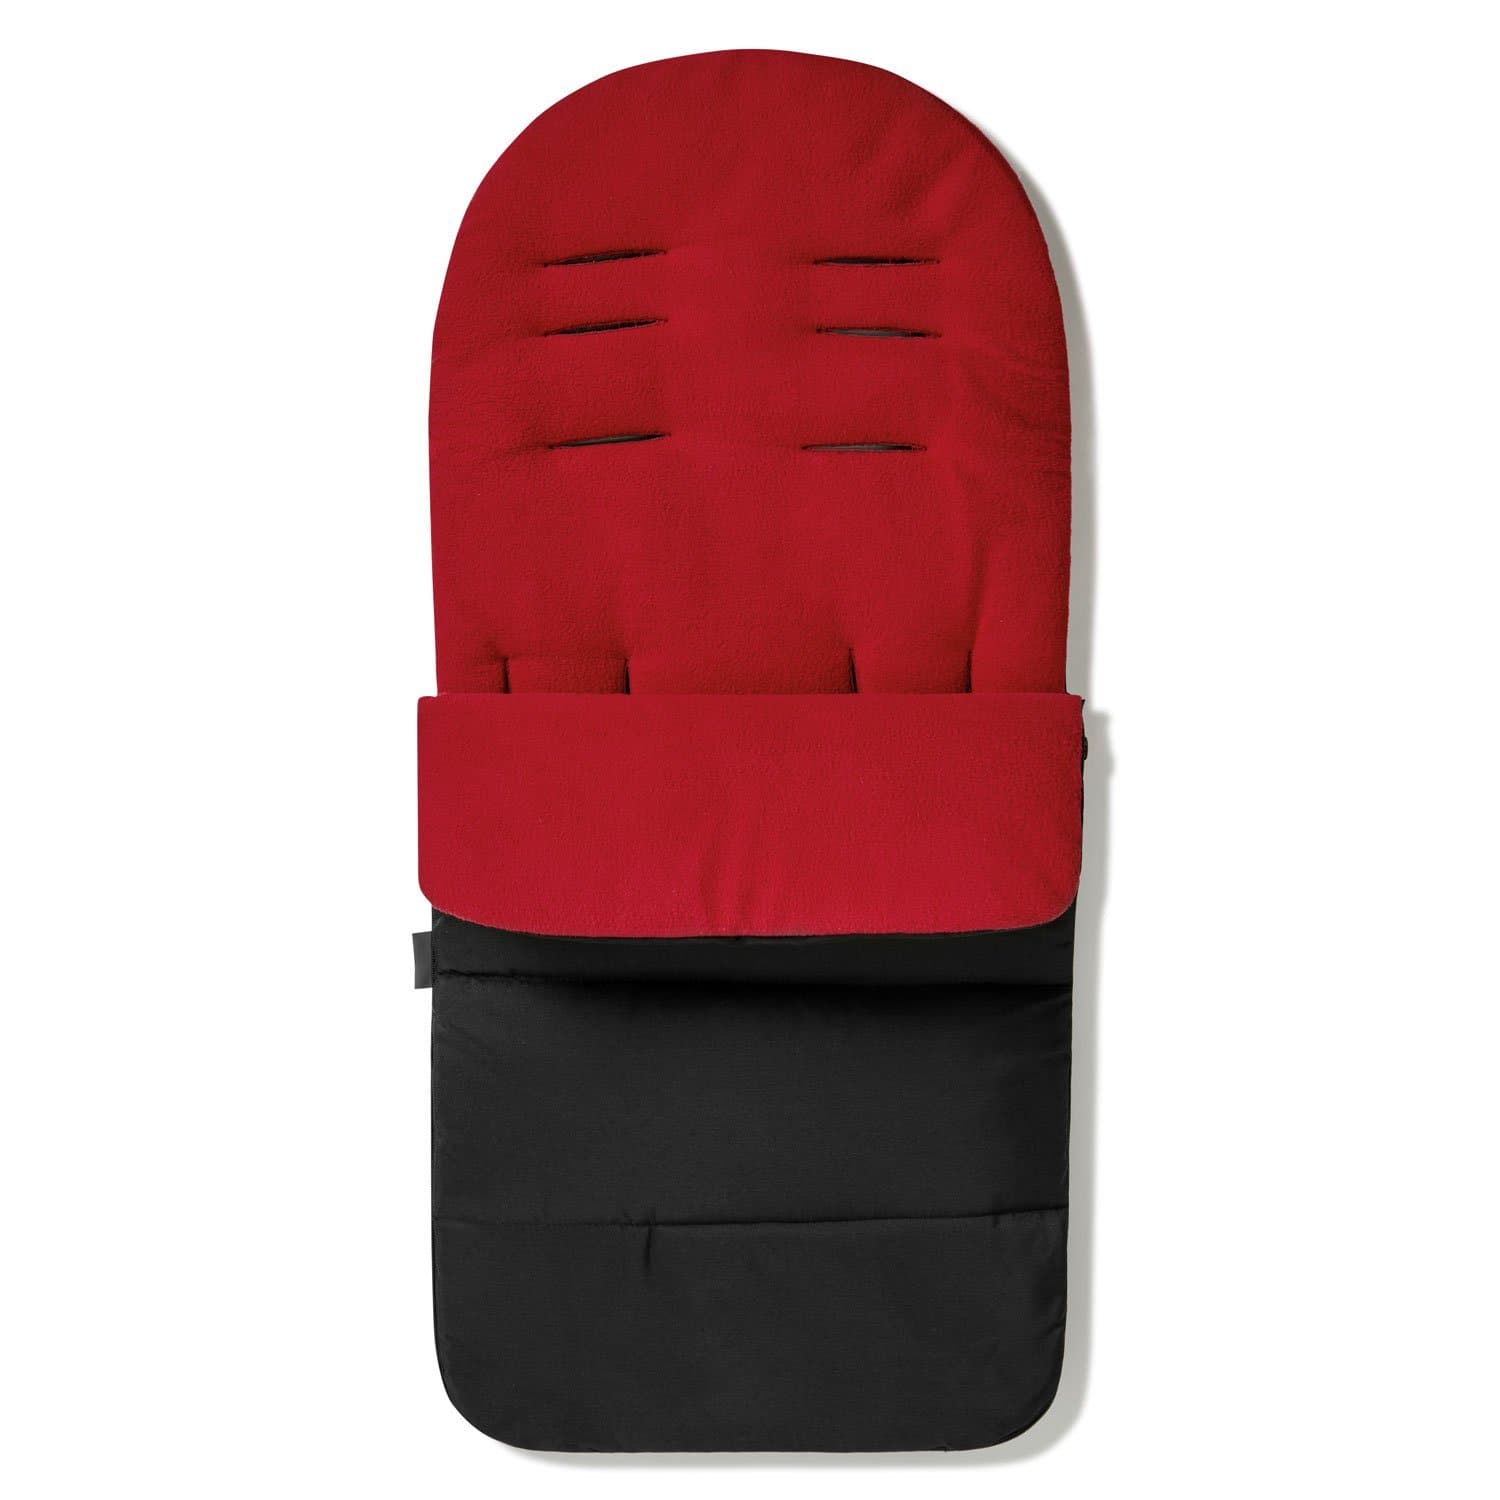 Premium Footmuff / Cosy Toes Compatible with Mee-Go - For Your Little One